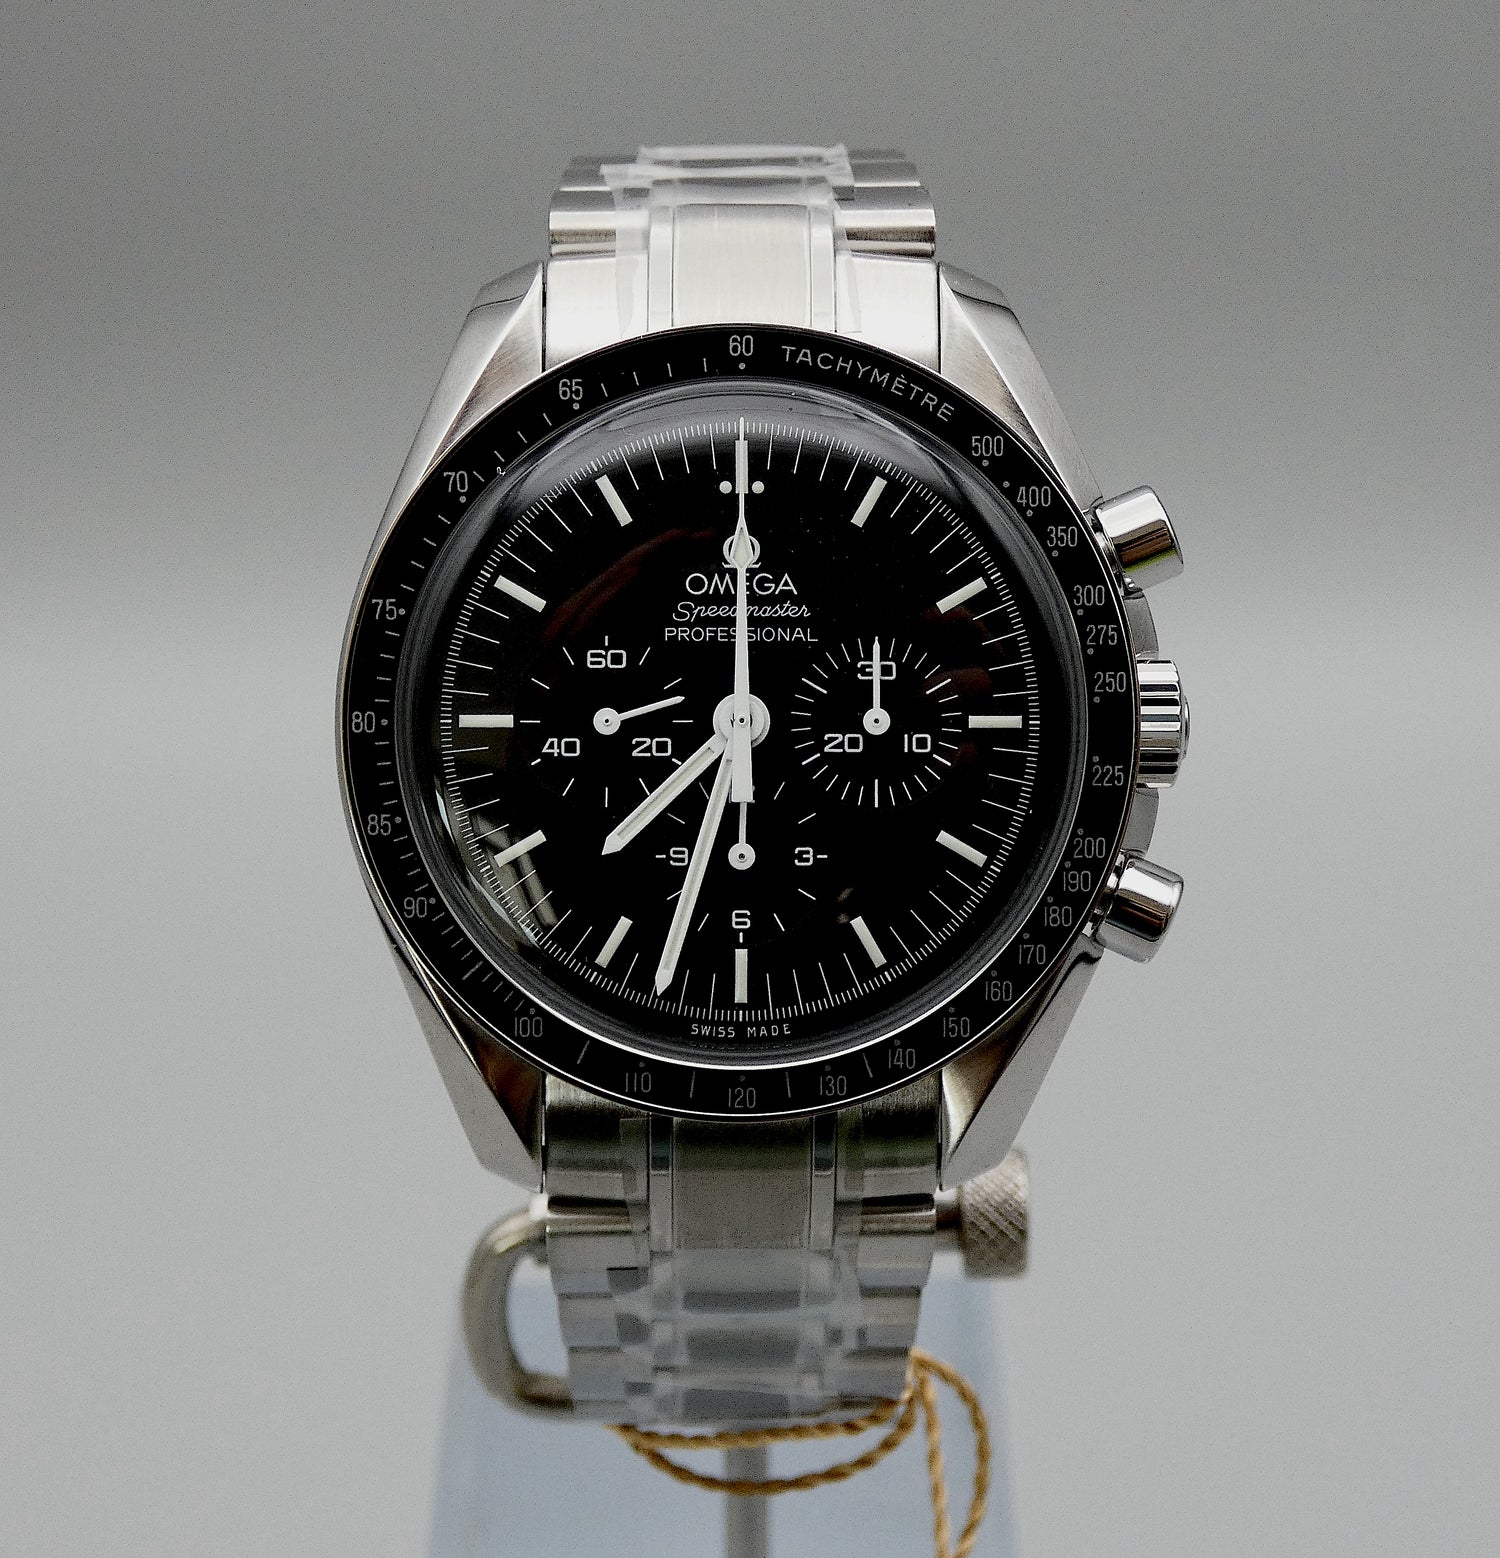 SOLD NEW Speedmaster Professional Moonwatch 2021 discontinued / full set